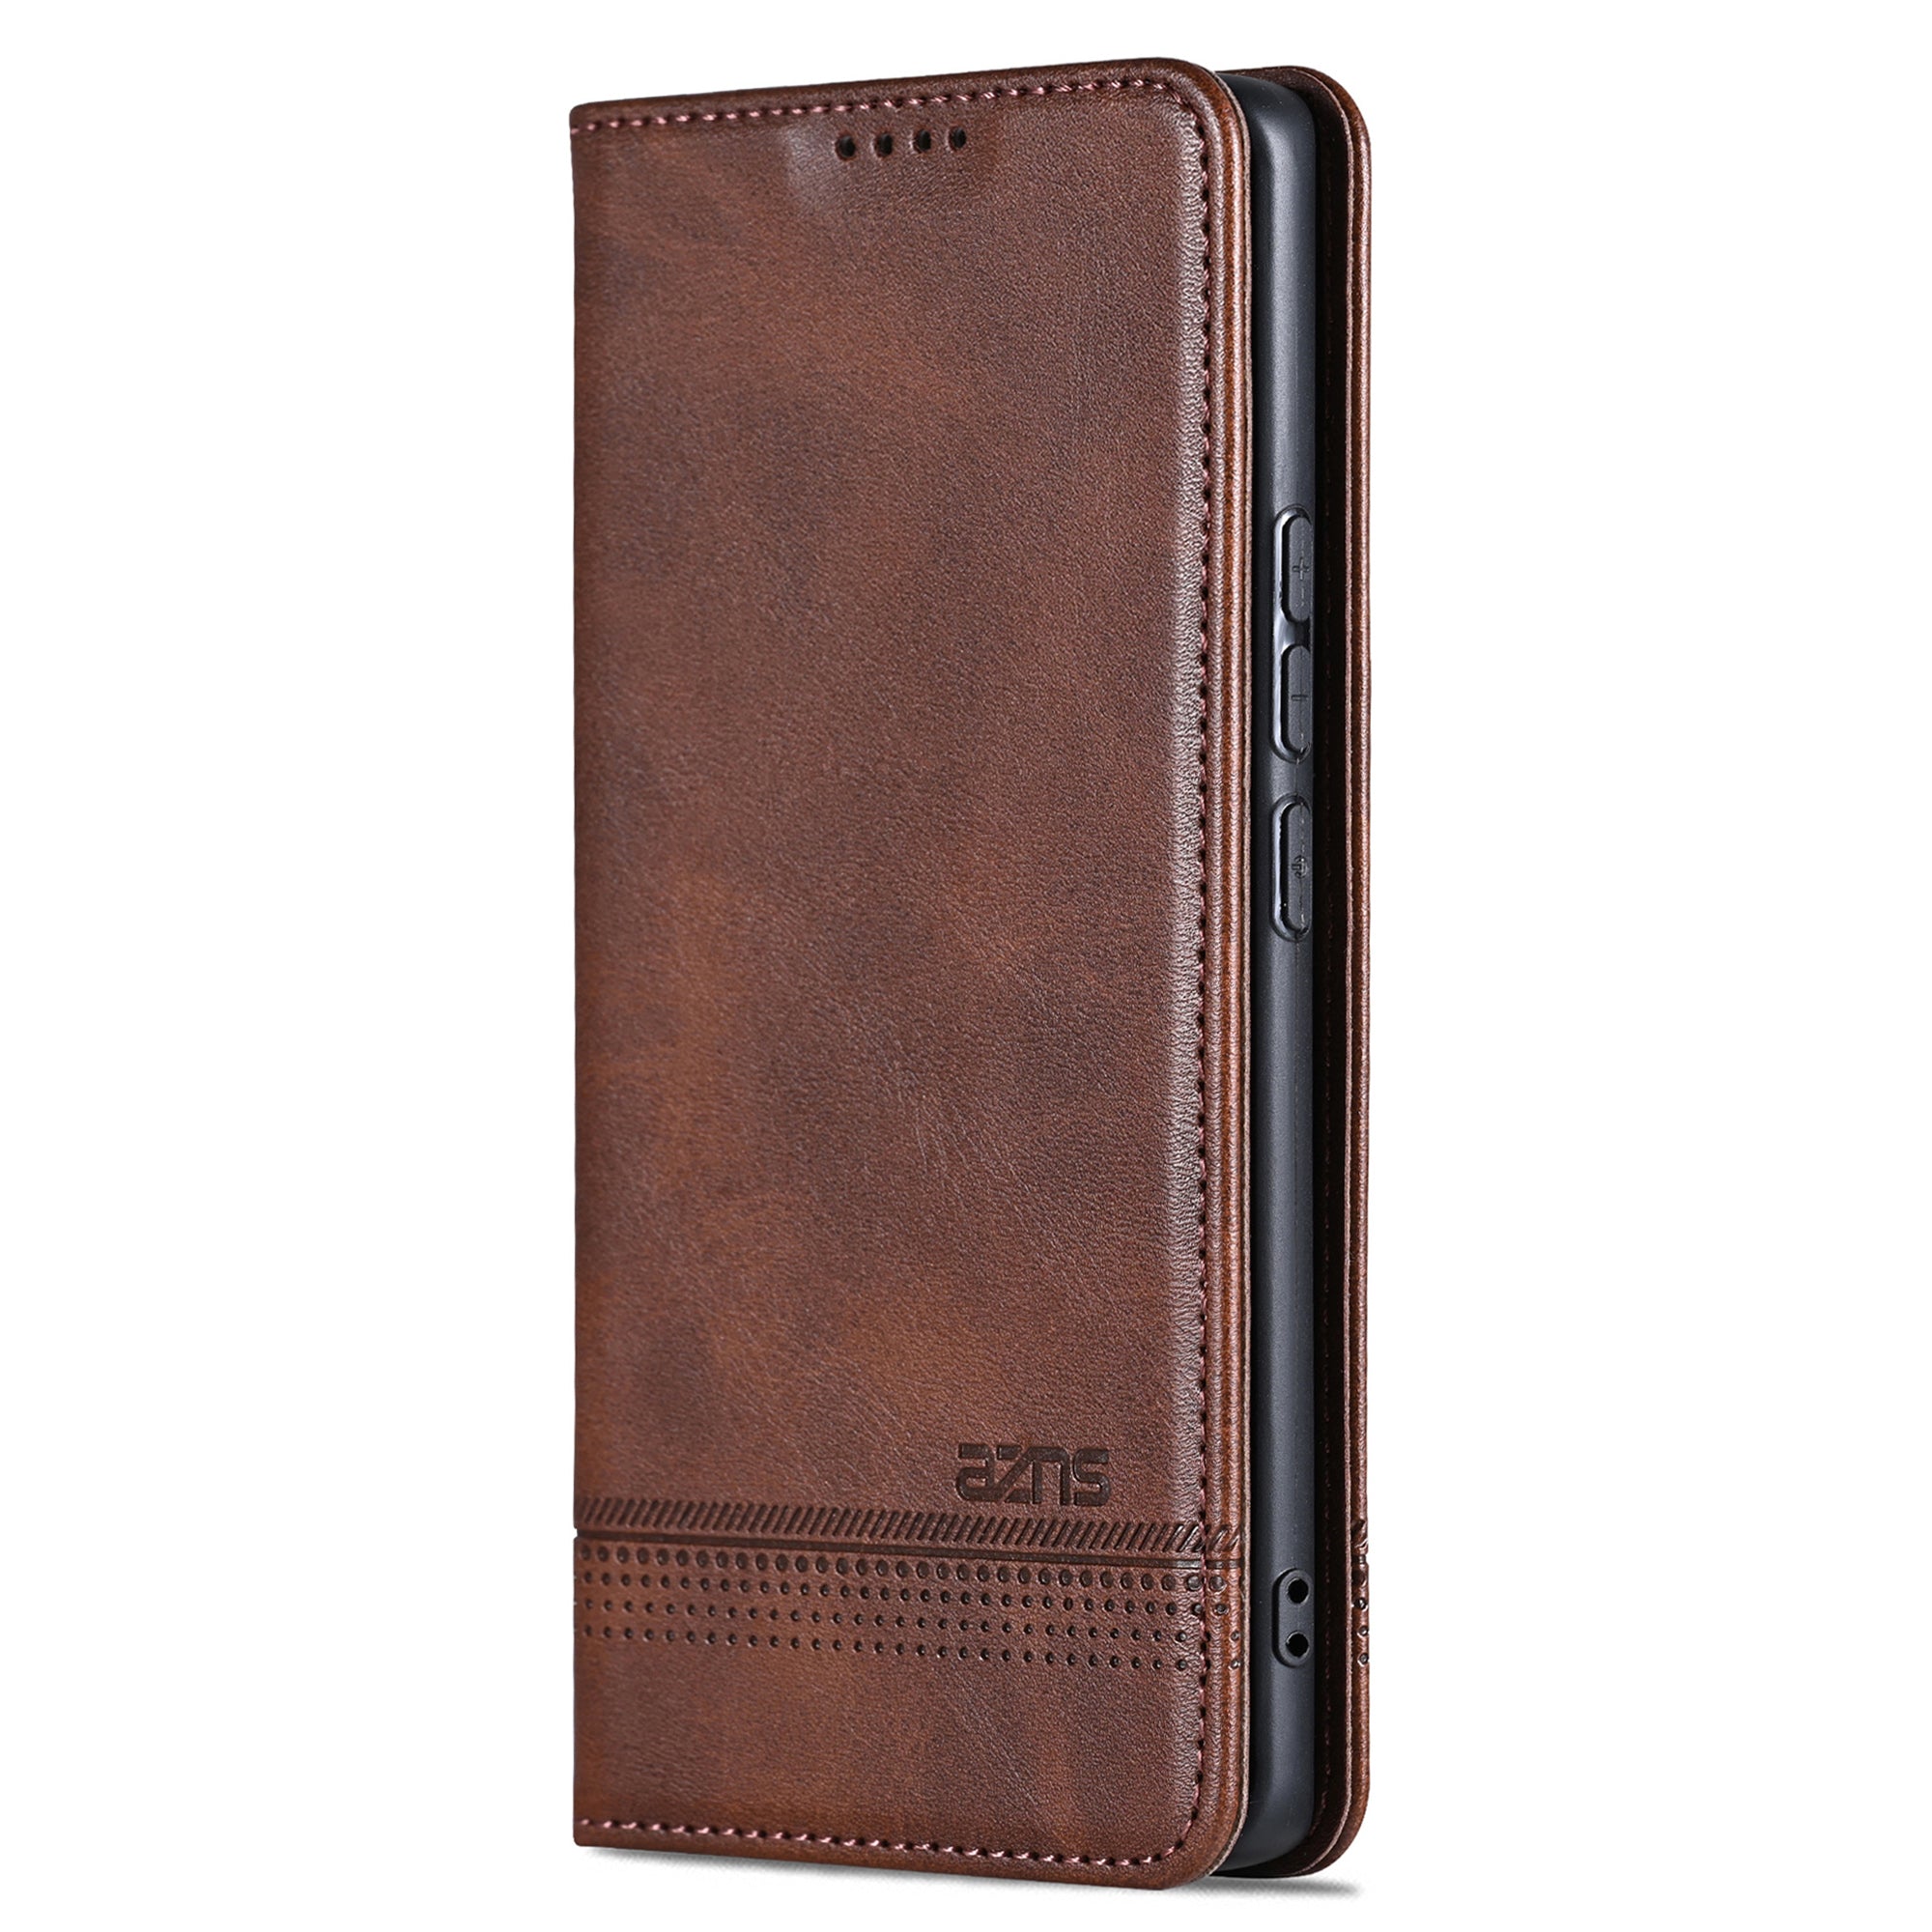 AZNS For Huawei Pura 70 Pro / Pura 70 Pro+ Case PU Leather Folio Wallet Magnetic Auto-absorbed Phone Cover - Coffee